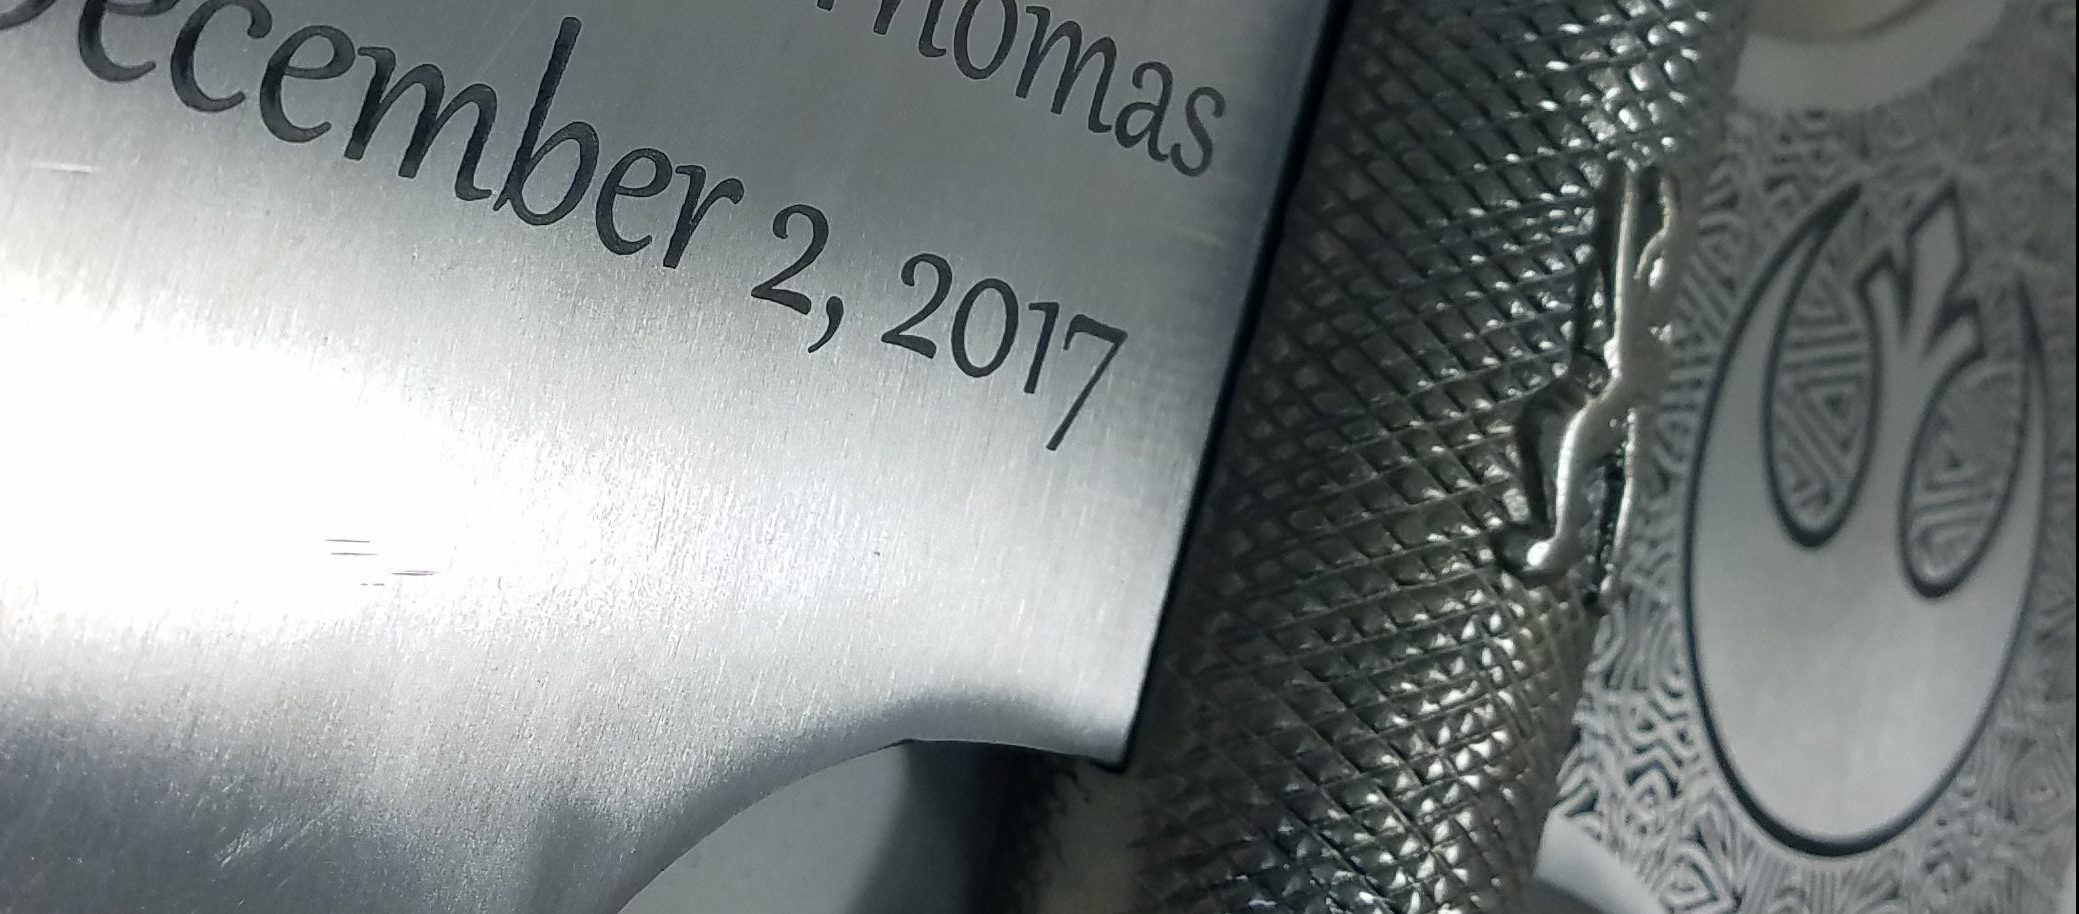 Personalized Knives